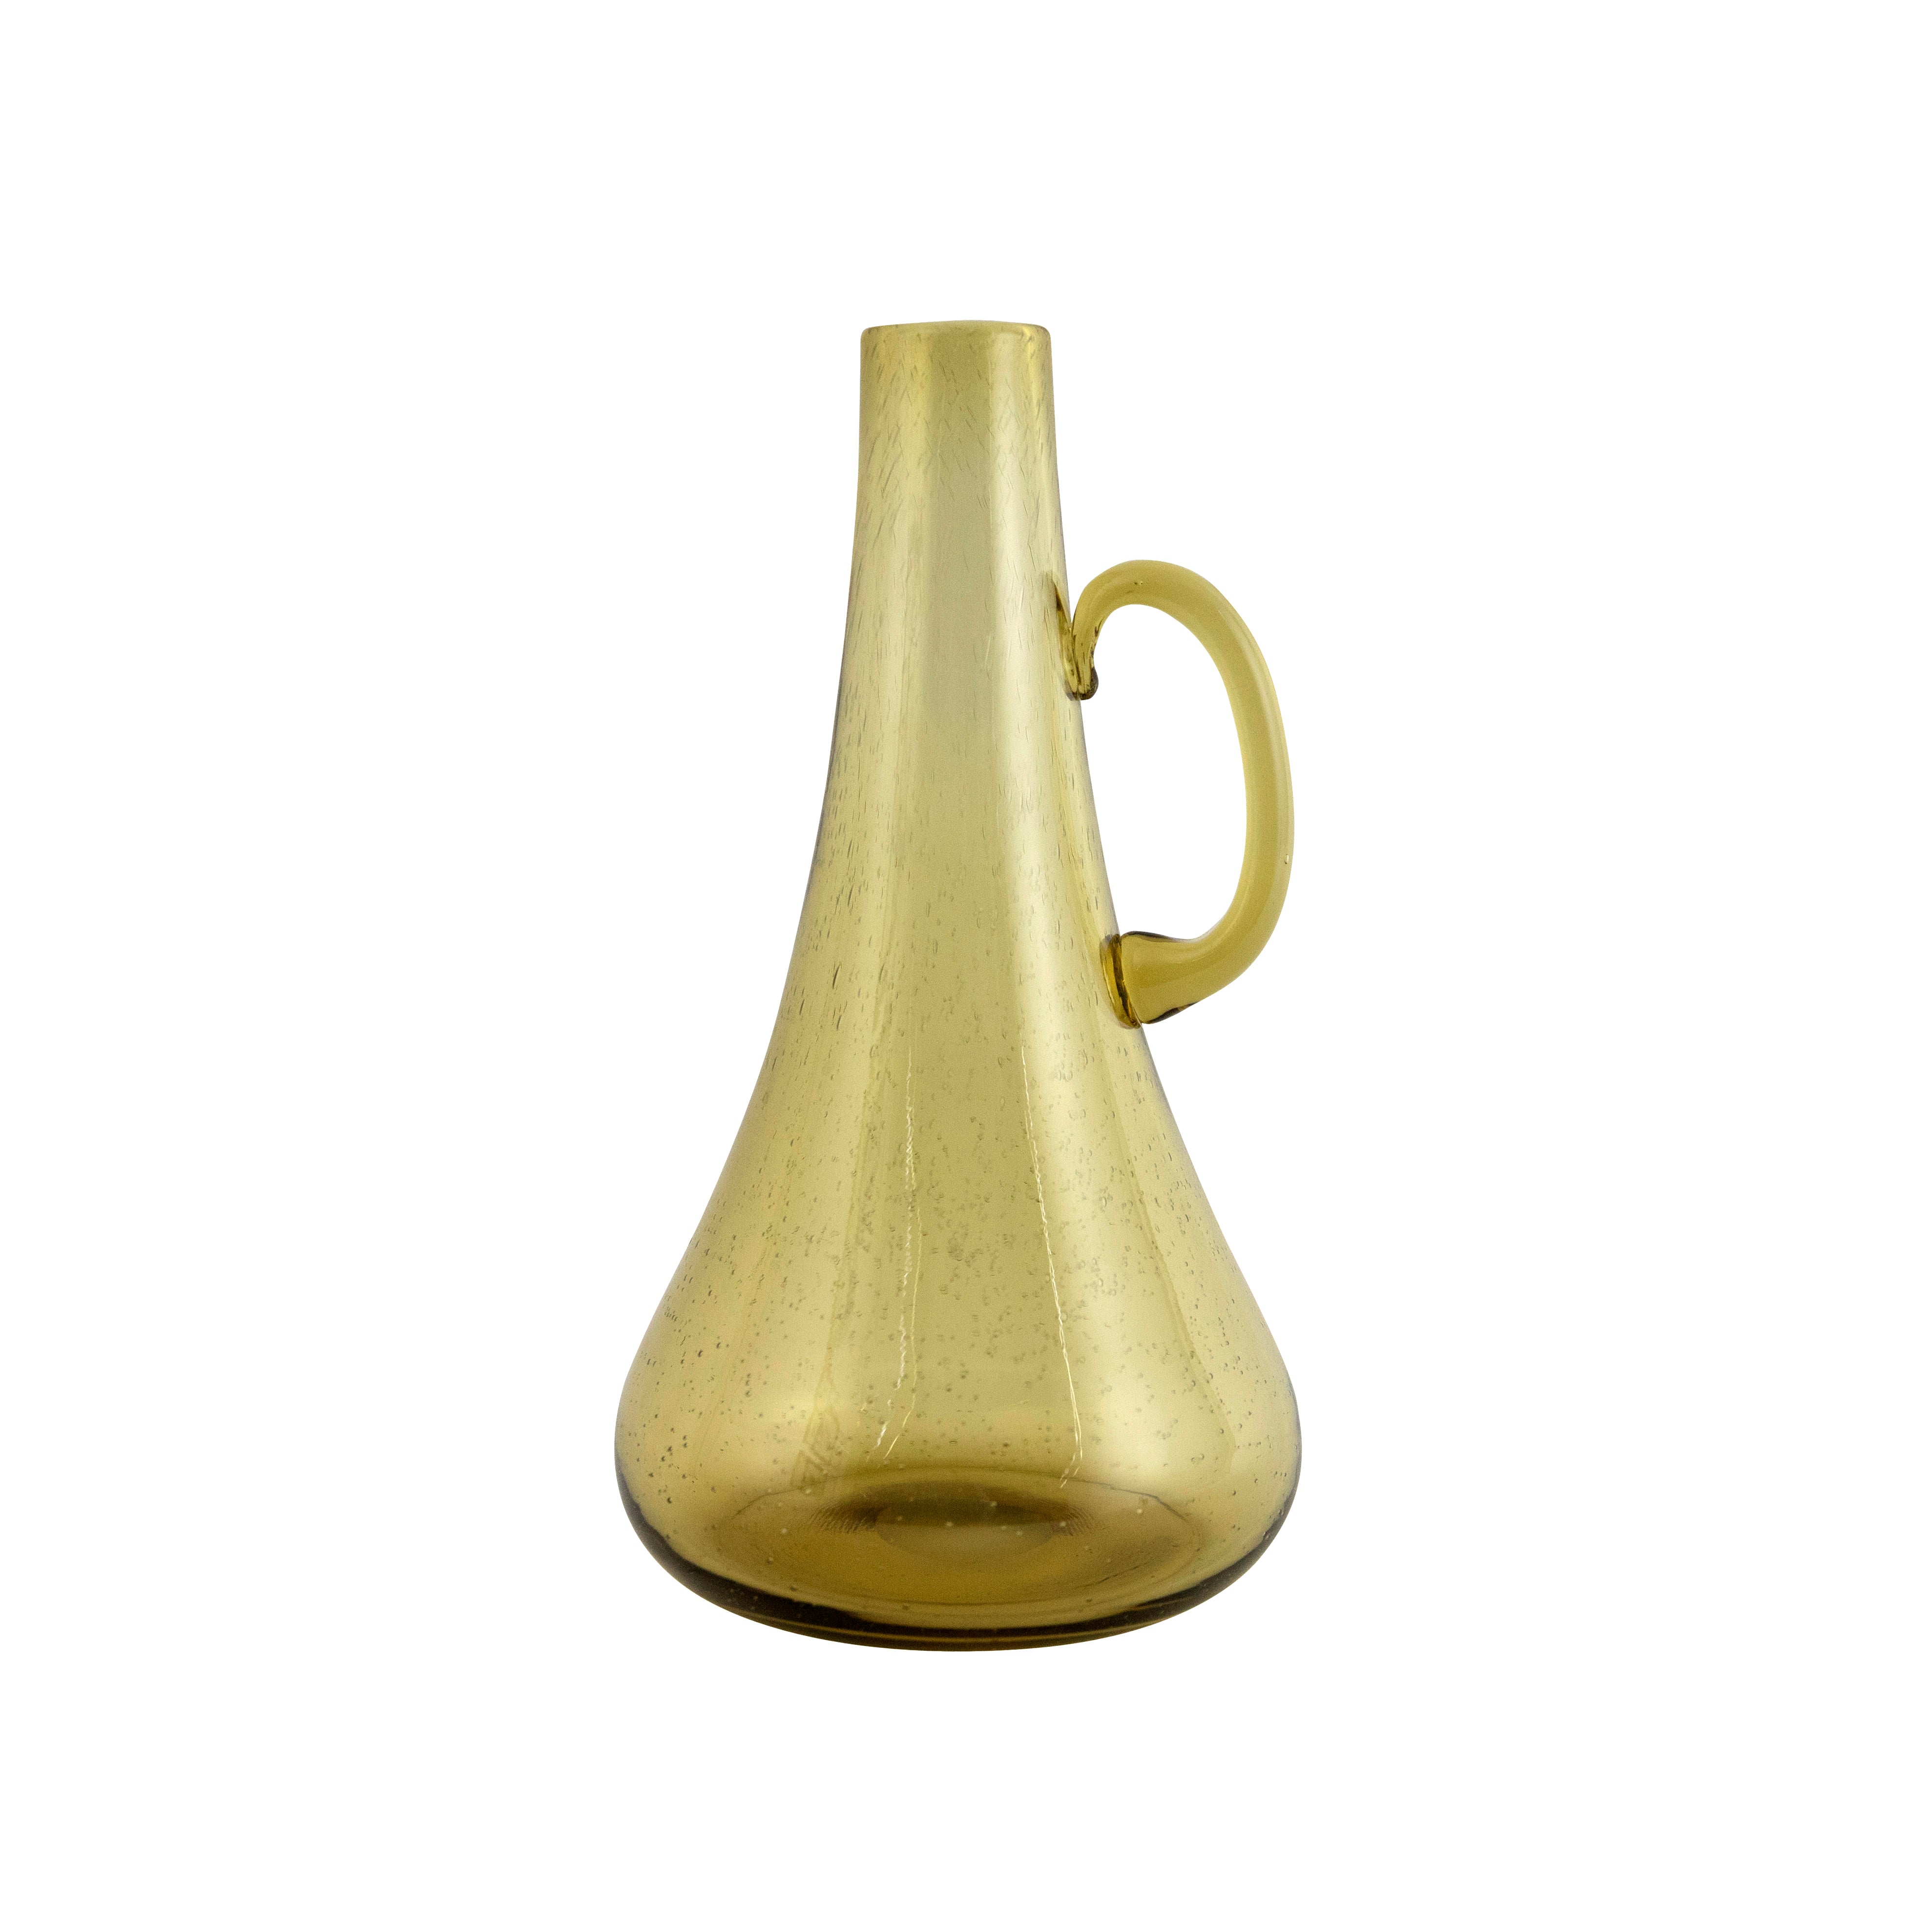 Yardley Glass Pitcher in Amber